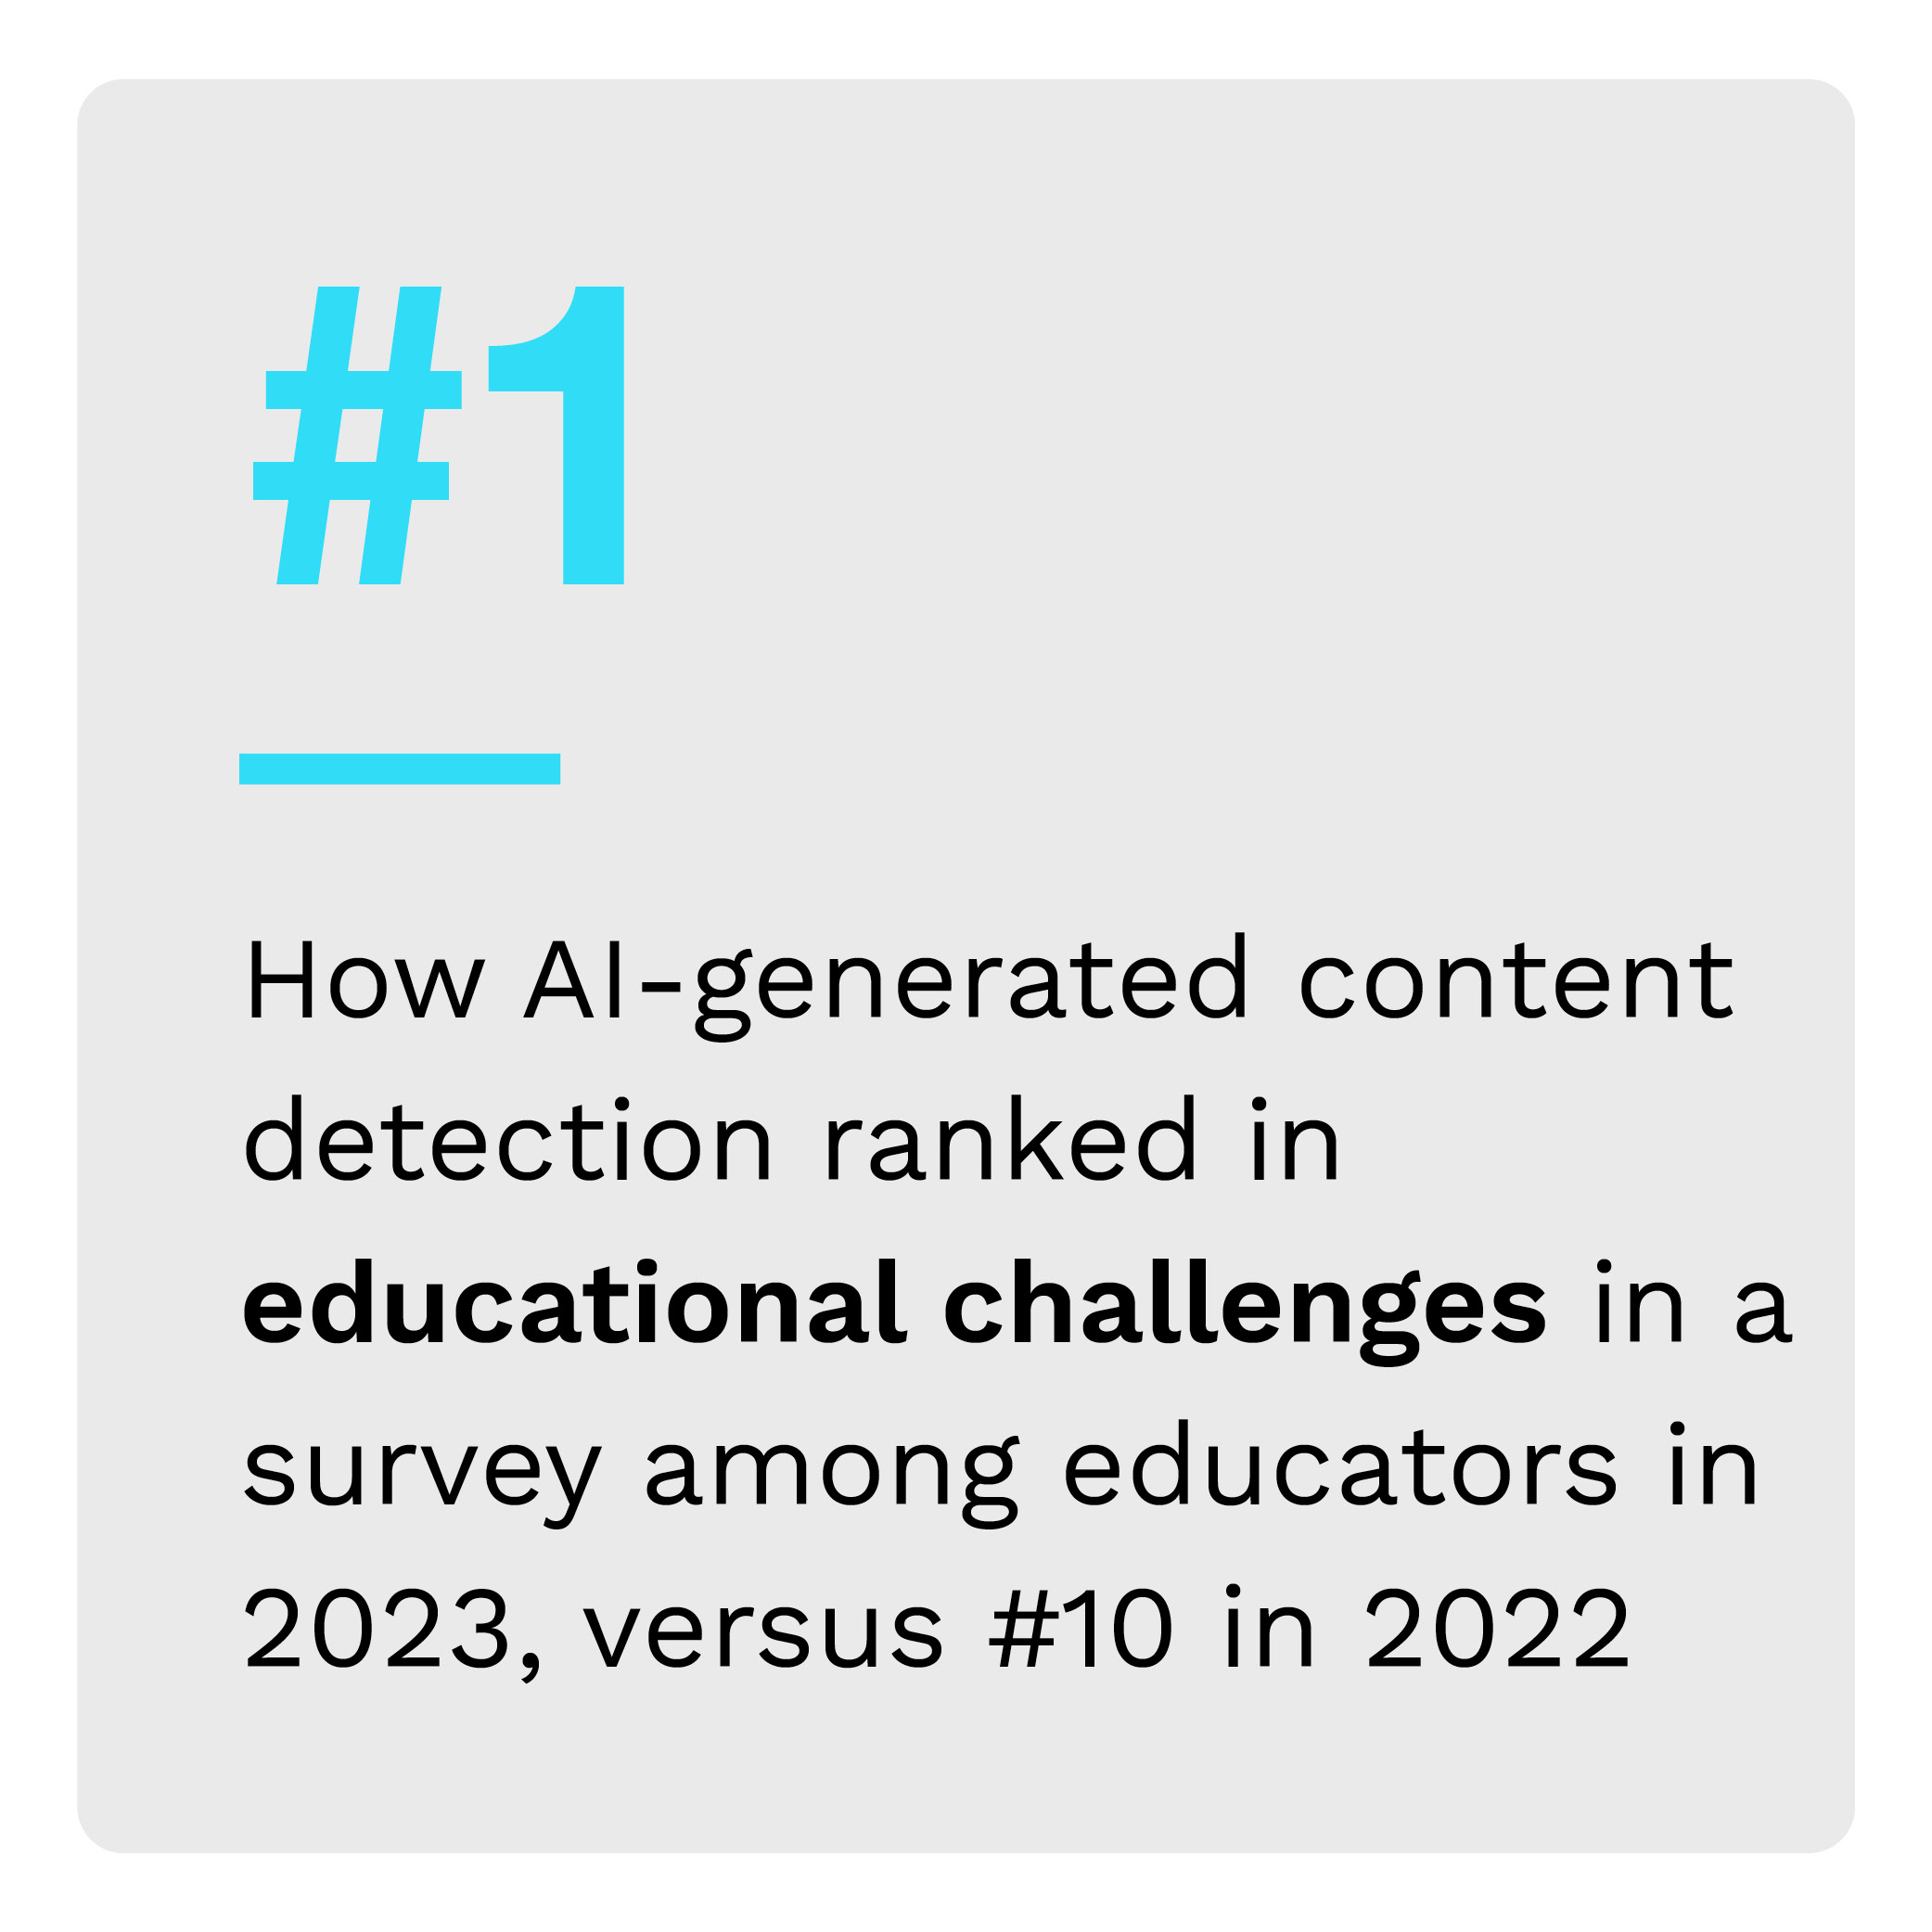 #1: How Al-generated content detection ranked in educational challenges in a survey among educators in 2023, versus #10 in 2022